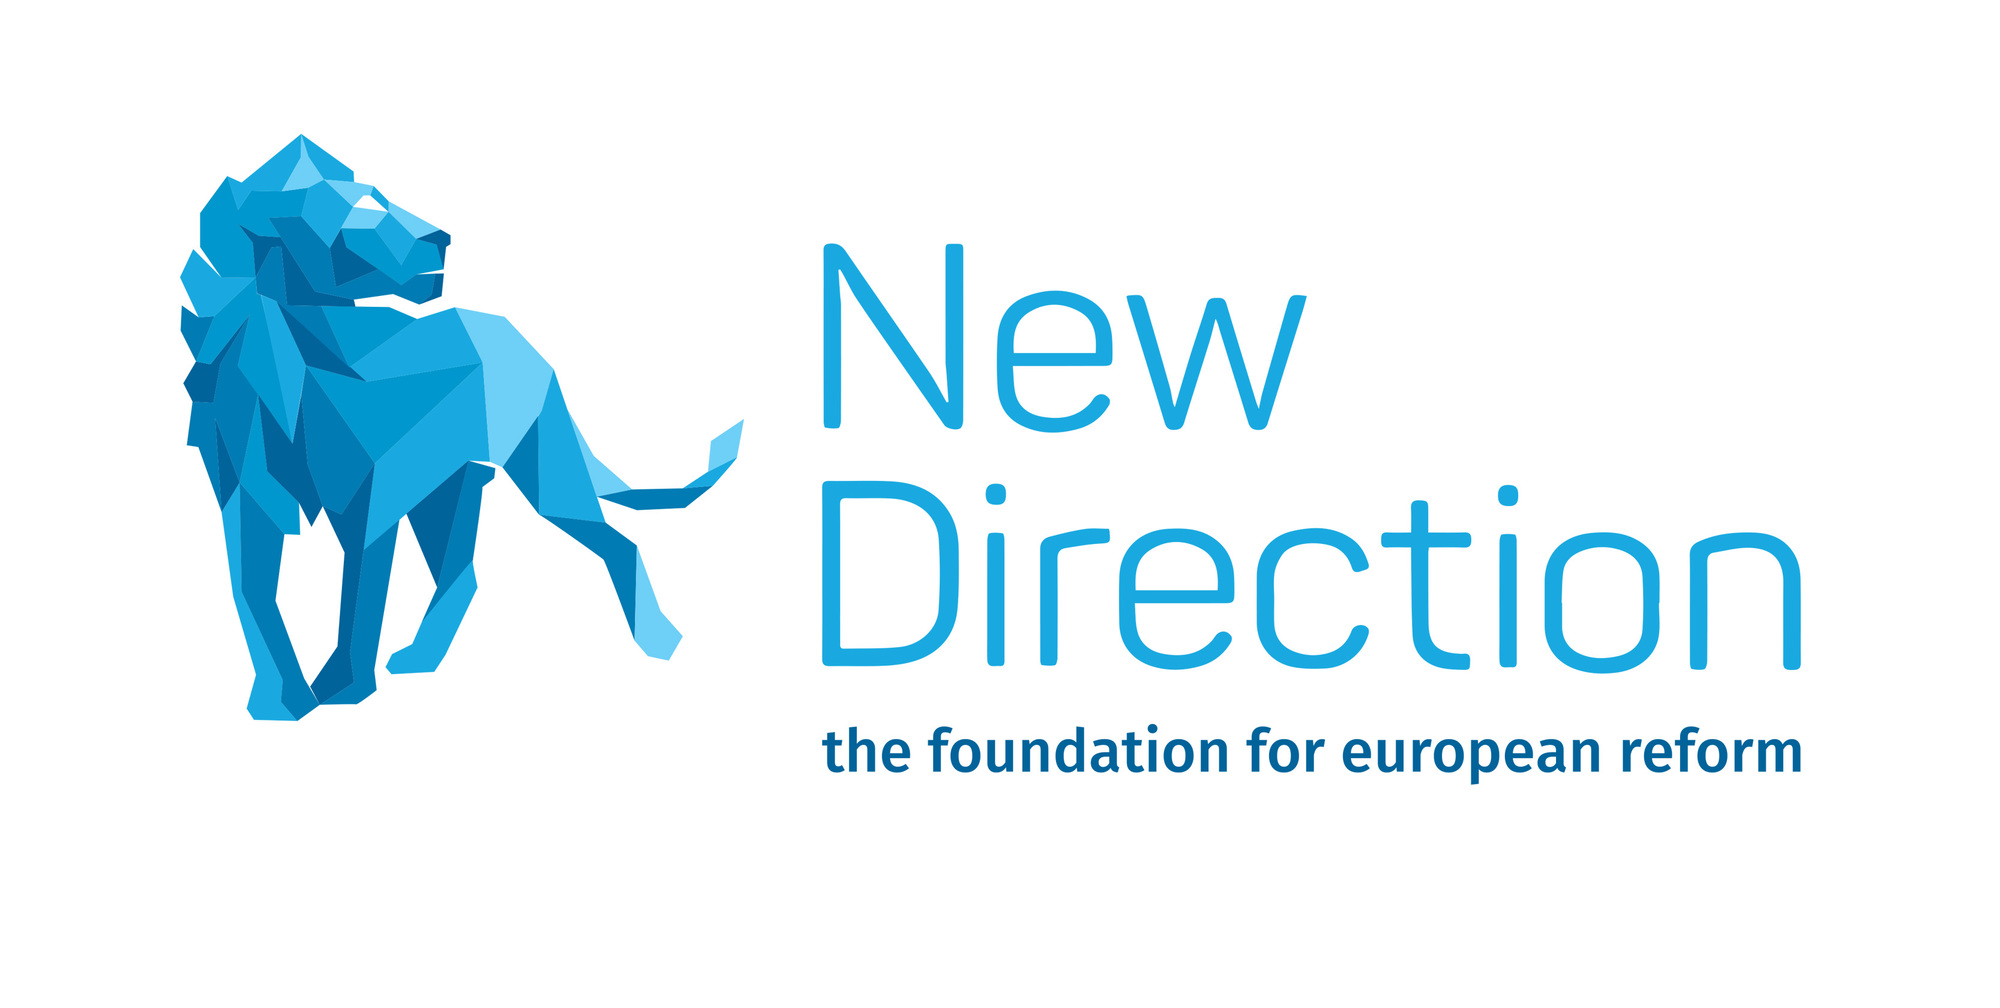 New directory. New Direction. The European Conservative логотип.